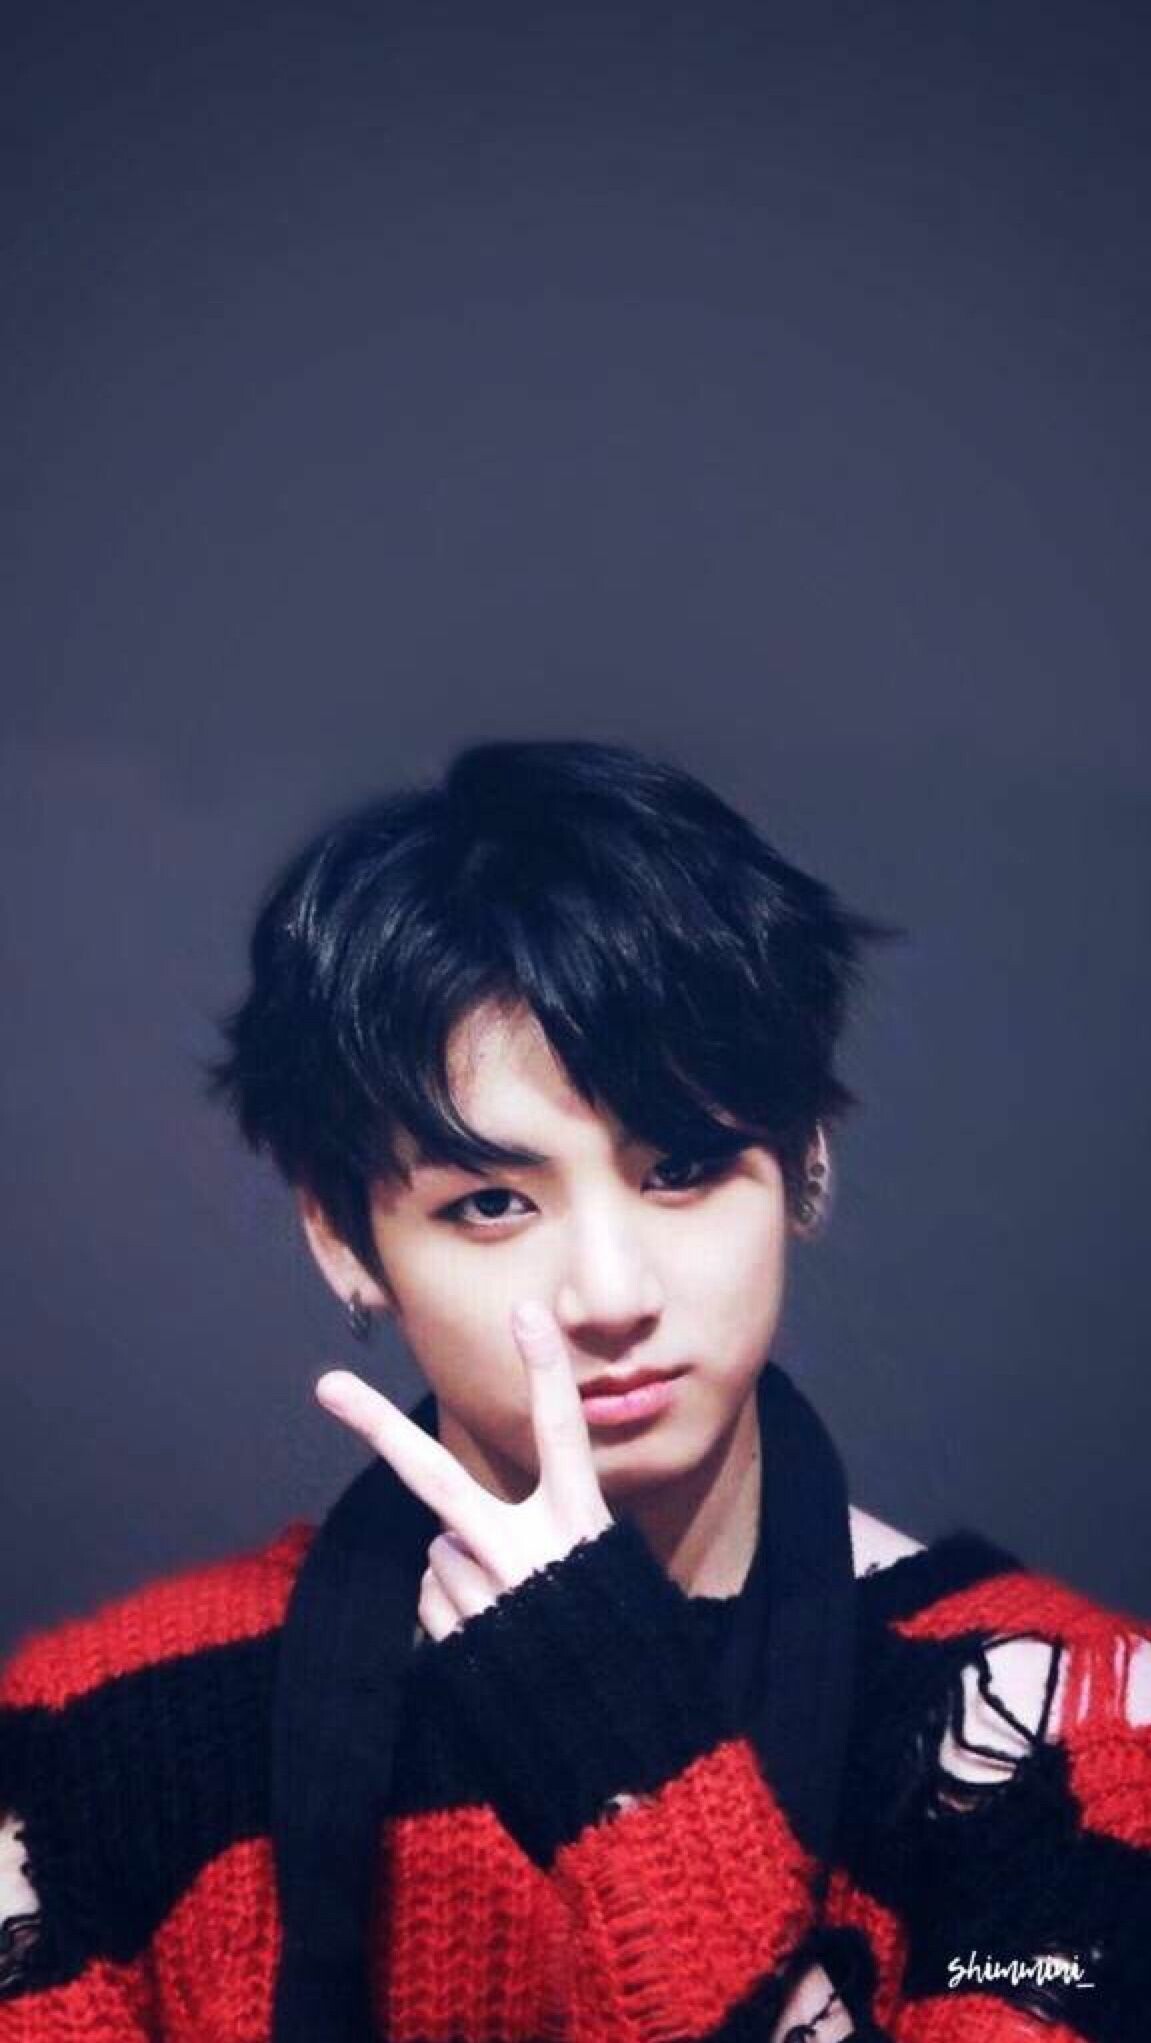 Jungkook: 2019's most-searched male K-pop idol on Google according to their mid-year chart. 1160x2050 HD Wallpaper.